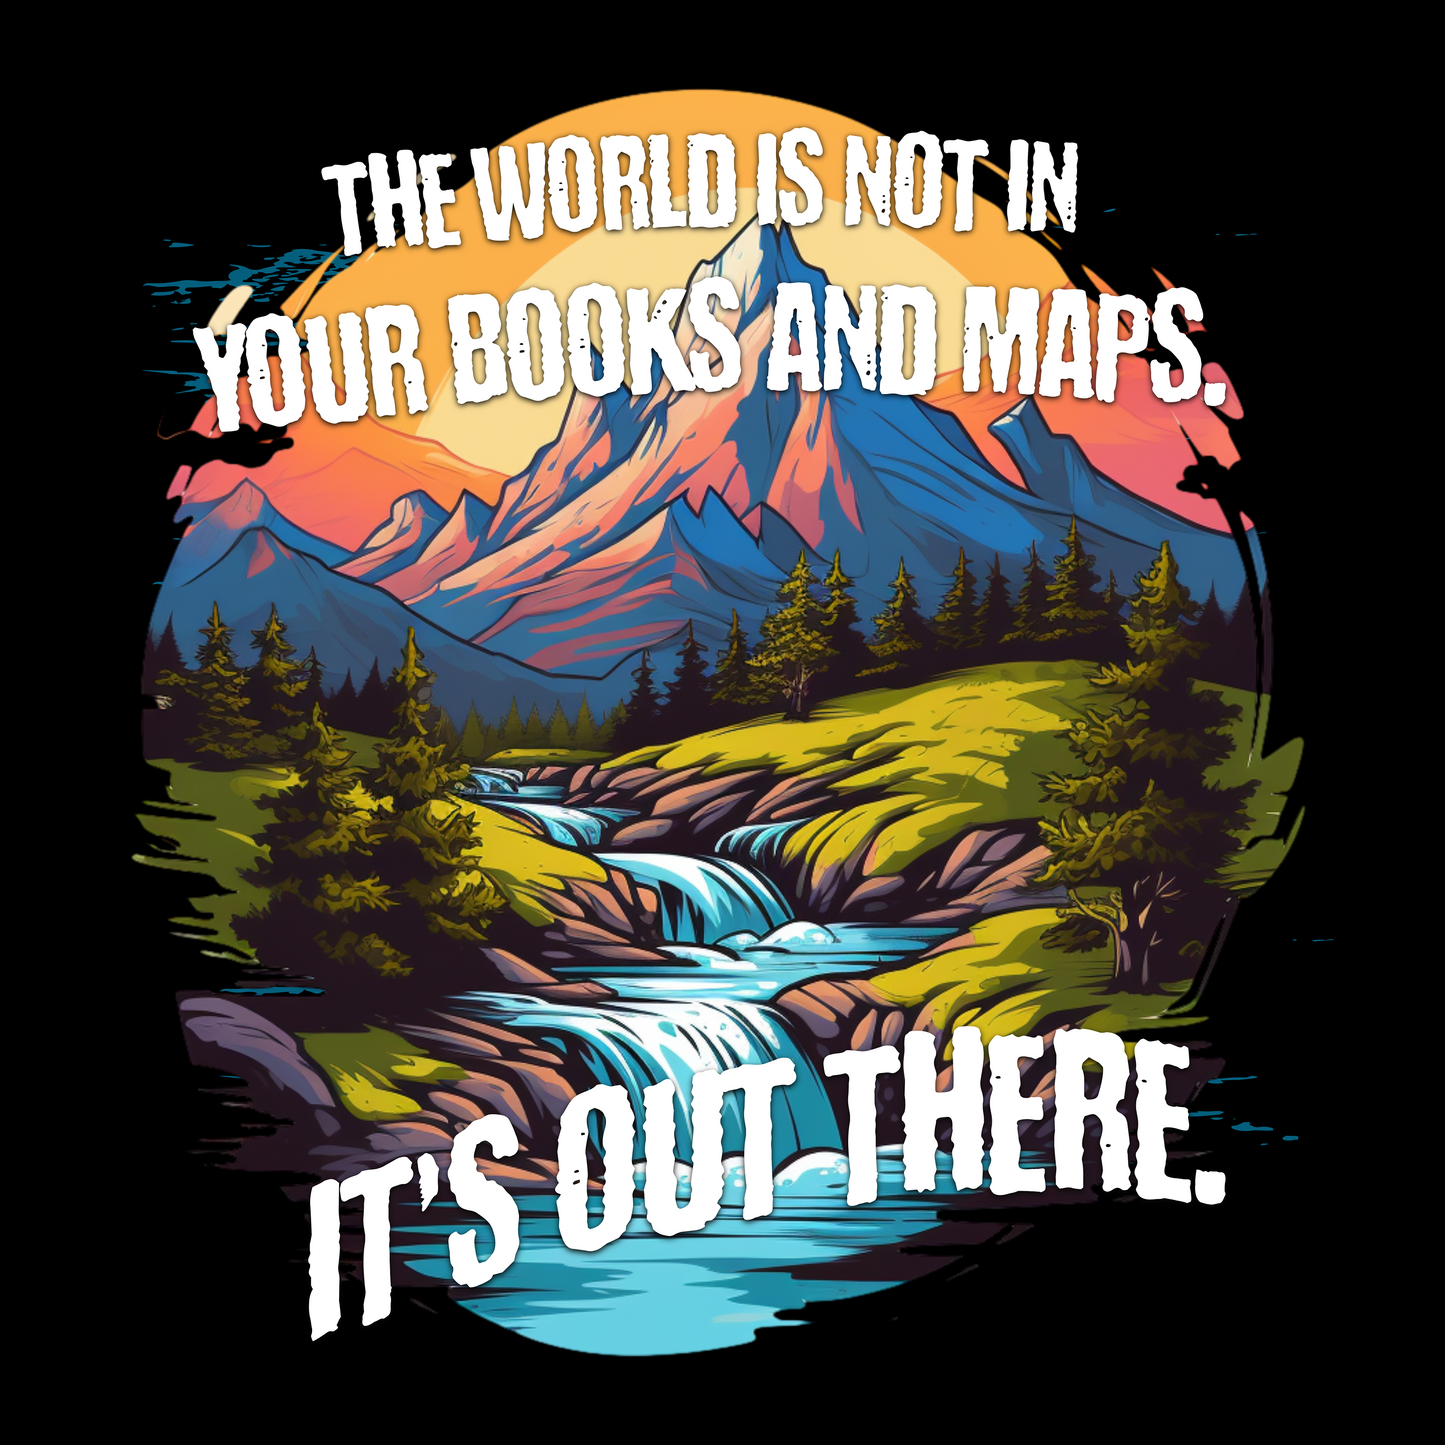 J.R.R. Tolkien T-Shirt, LOTR Quote "Its Out There", Explorers, Hikers, Climbers, Walkers, Gift for LOTR Fans